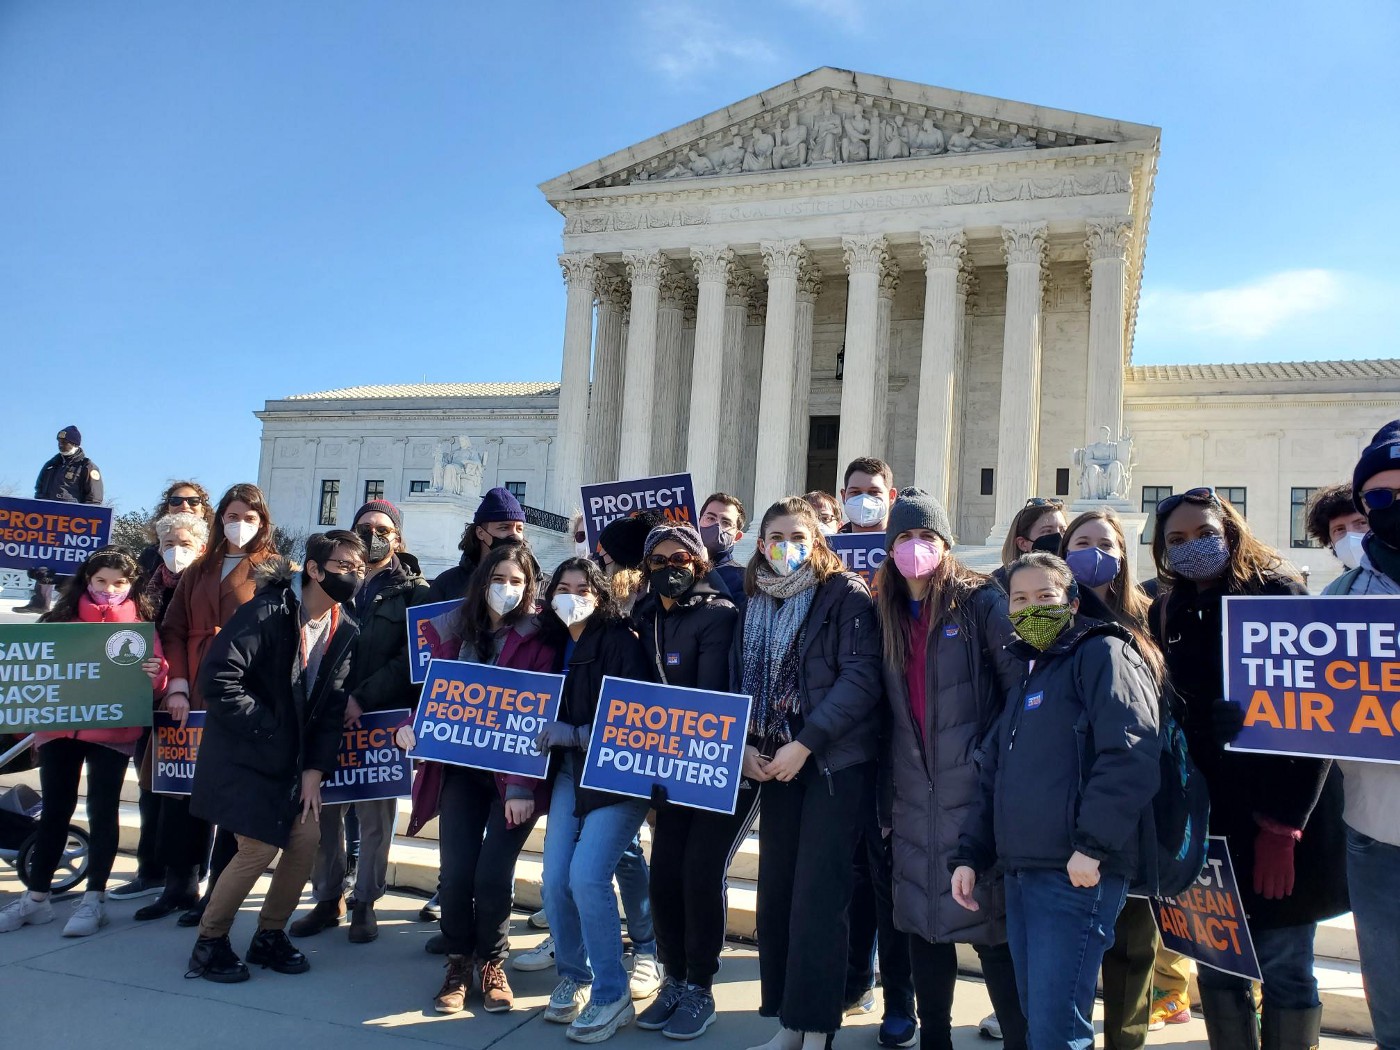 An image of a group of protesters standing in front of the Supreme Court holding signs that say, “Protect People, Not Polluters.”